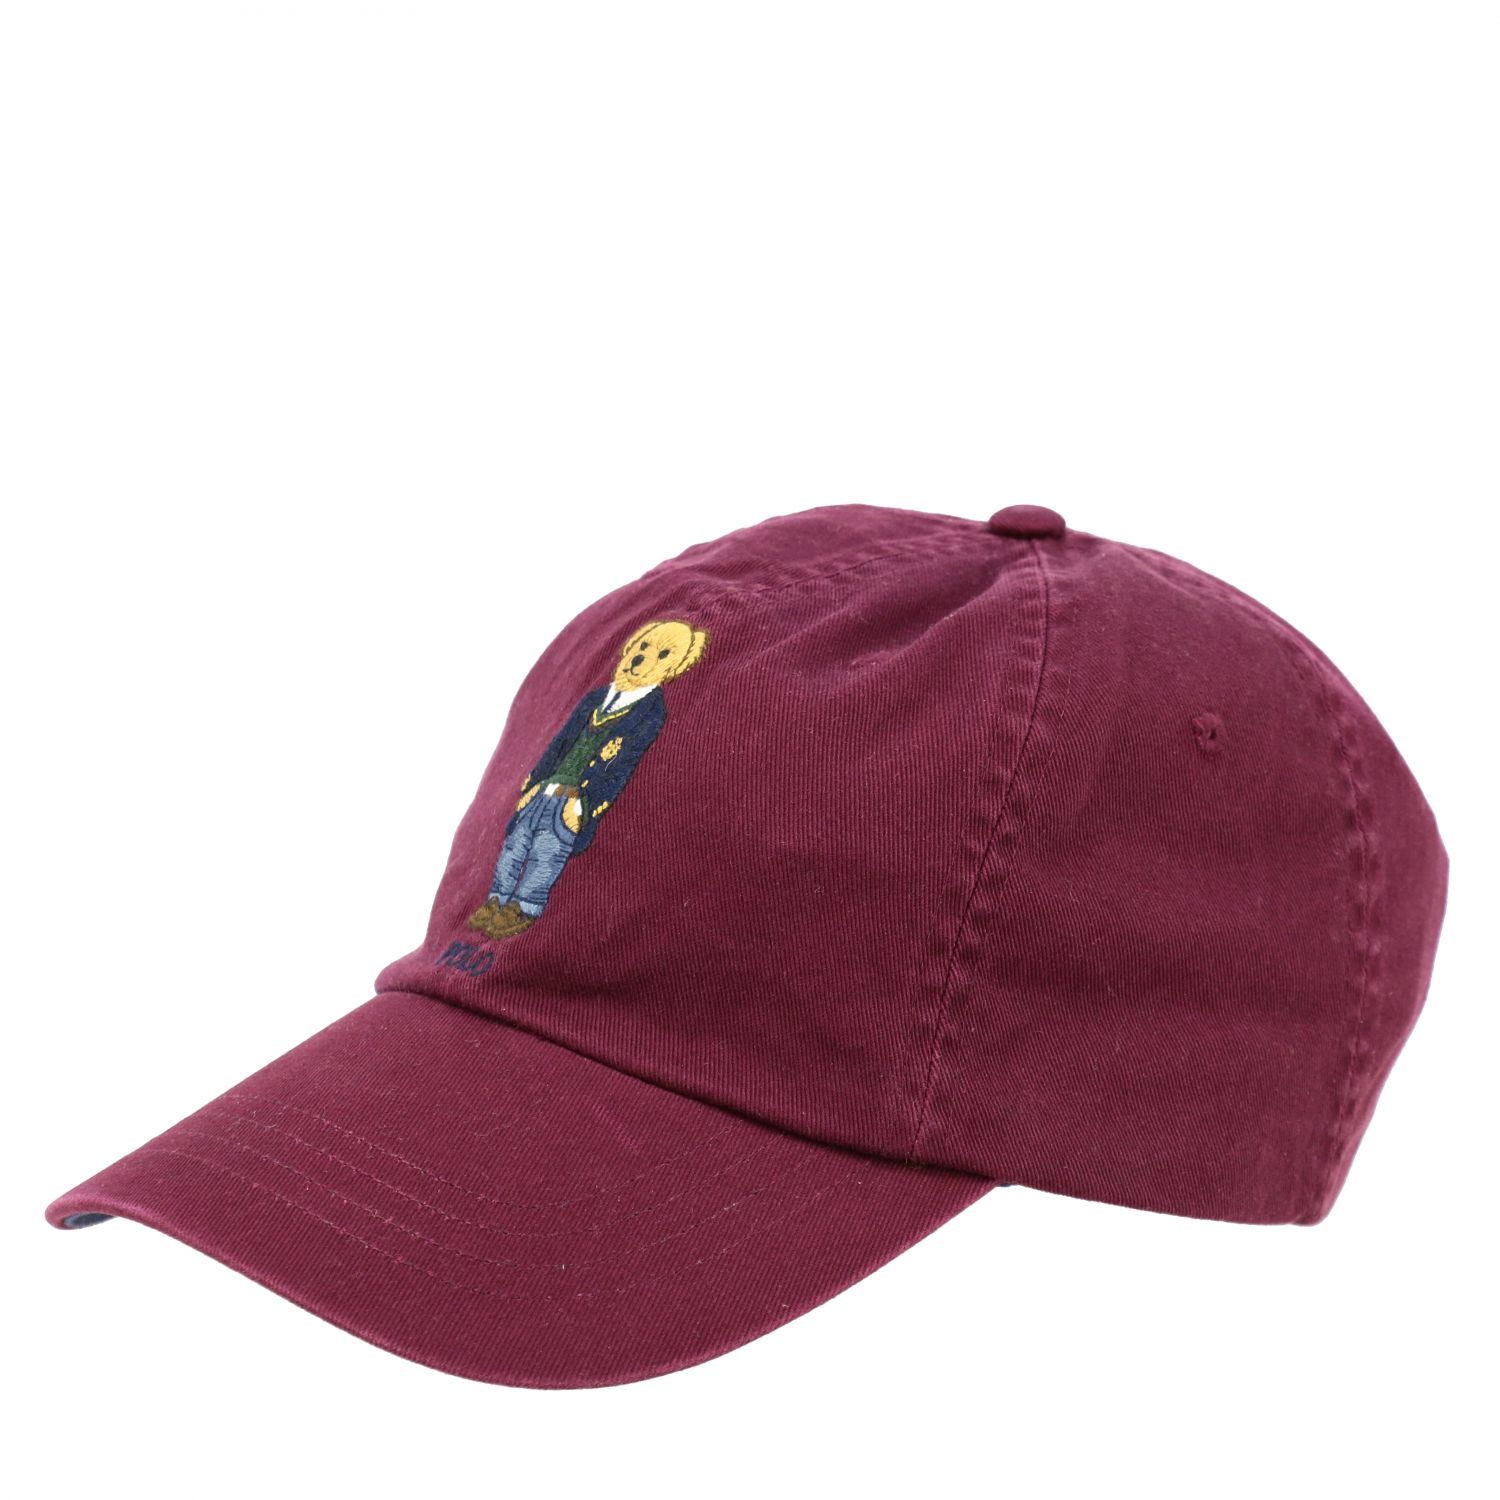 stopcontact namens toetje Polo Ralph Lauren Outlet: hat with bear - Burgundy | Polo Ralph Lauren hat  710765086 online on GIGLIO.COM